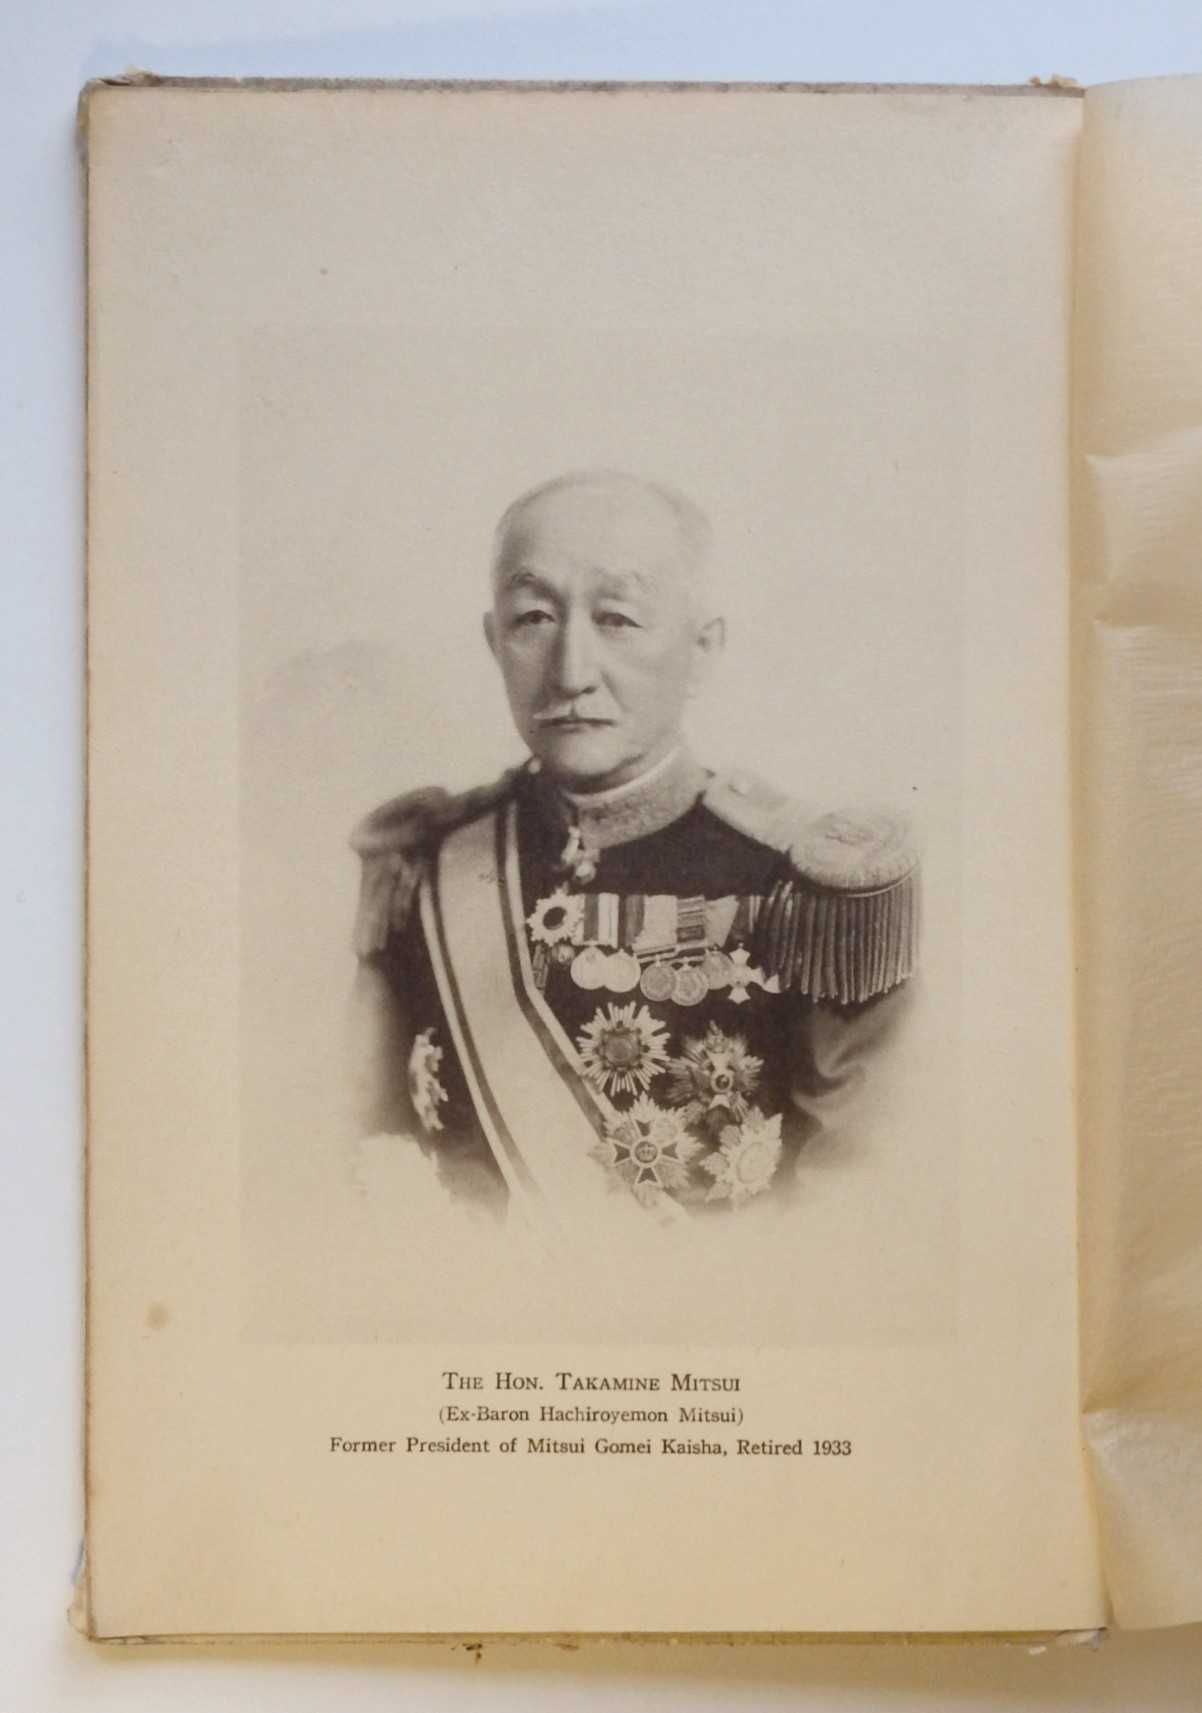 "The House of Mitsui; a Record of Three Centuries: Past History and.."